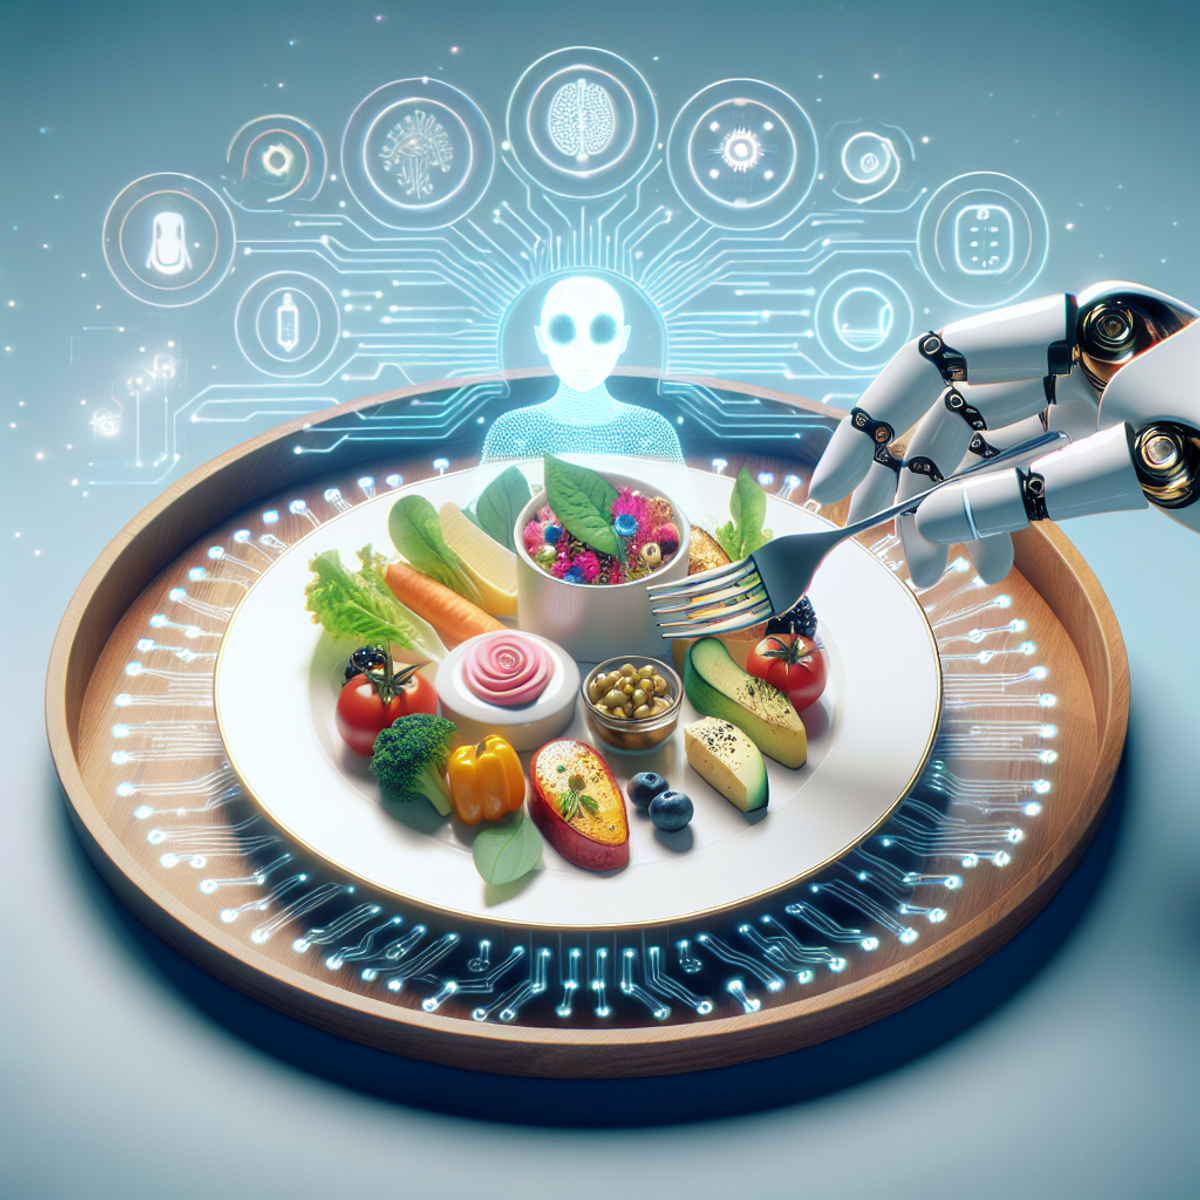 A robotic arm serving a gourmet dish with subtle symbols of artificial intelligence and technology.